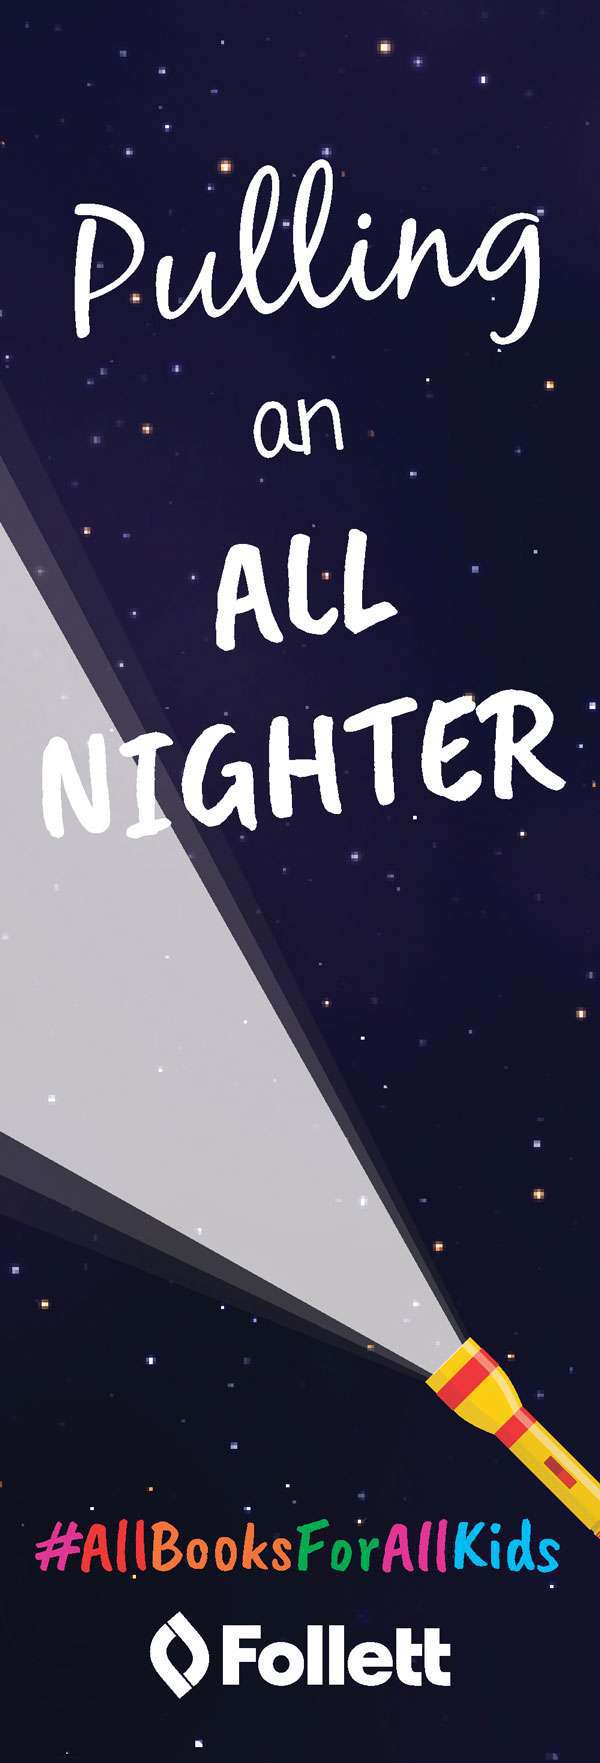 Pulling an All Nighter Bookmark Image